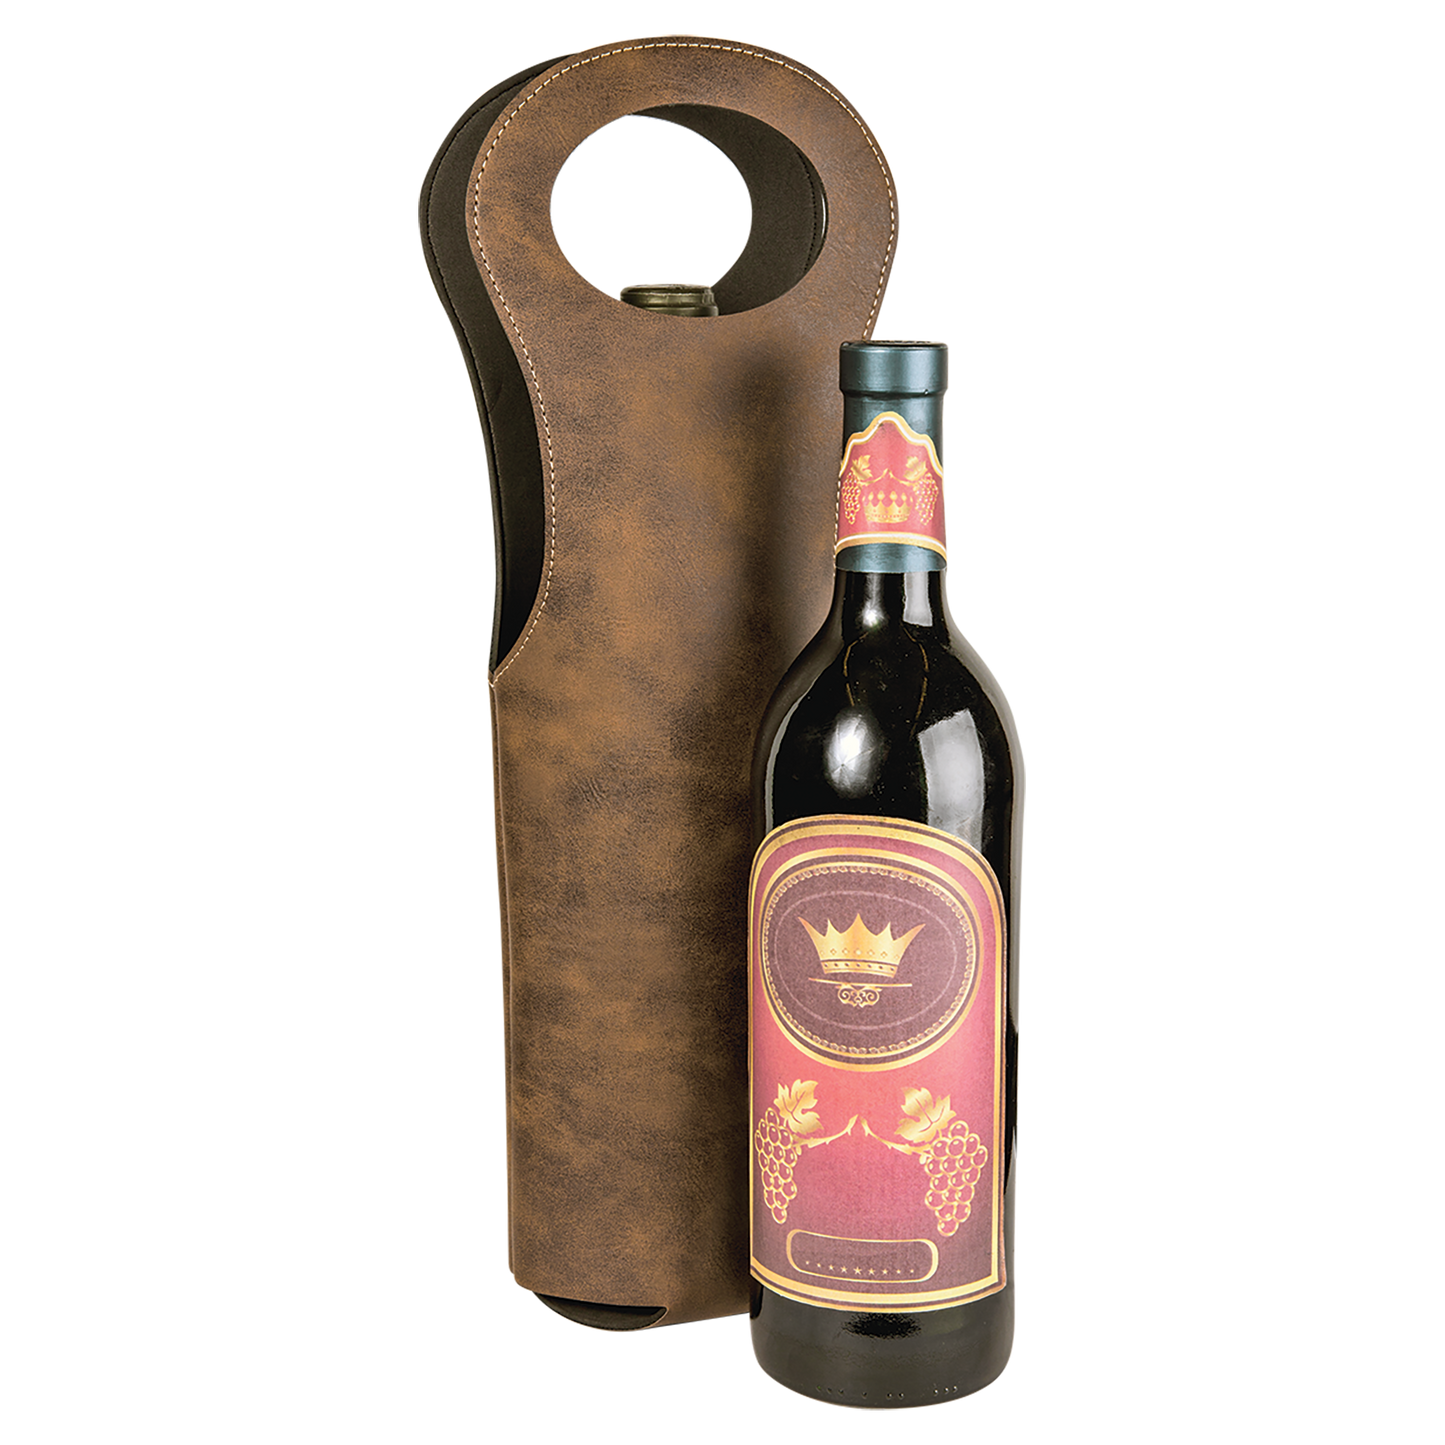 Personalized Wine Bottle Tote